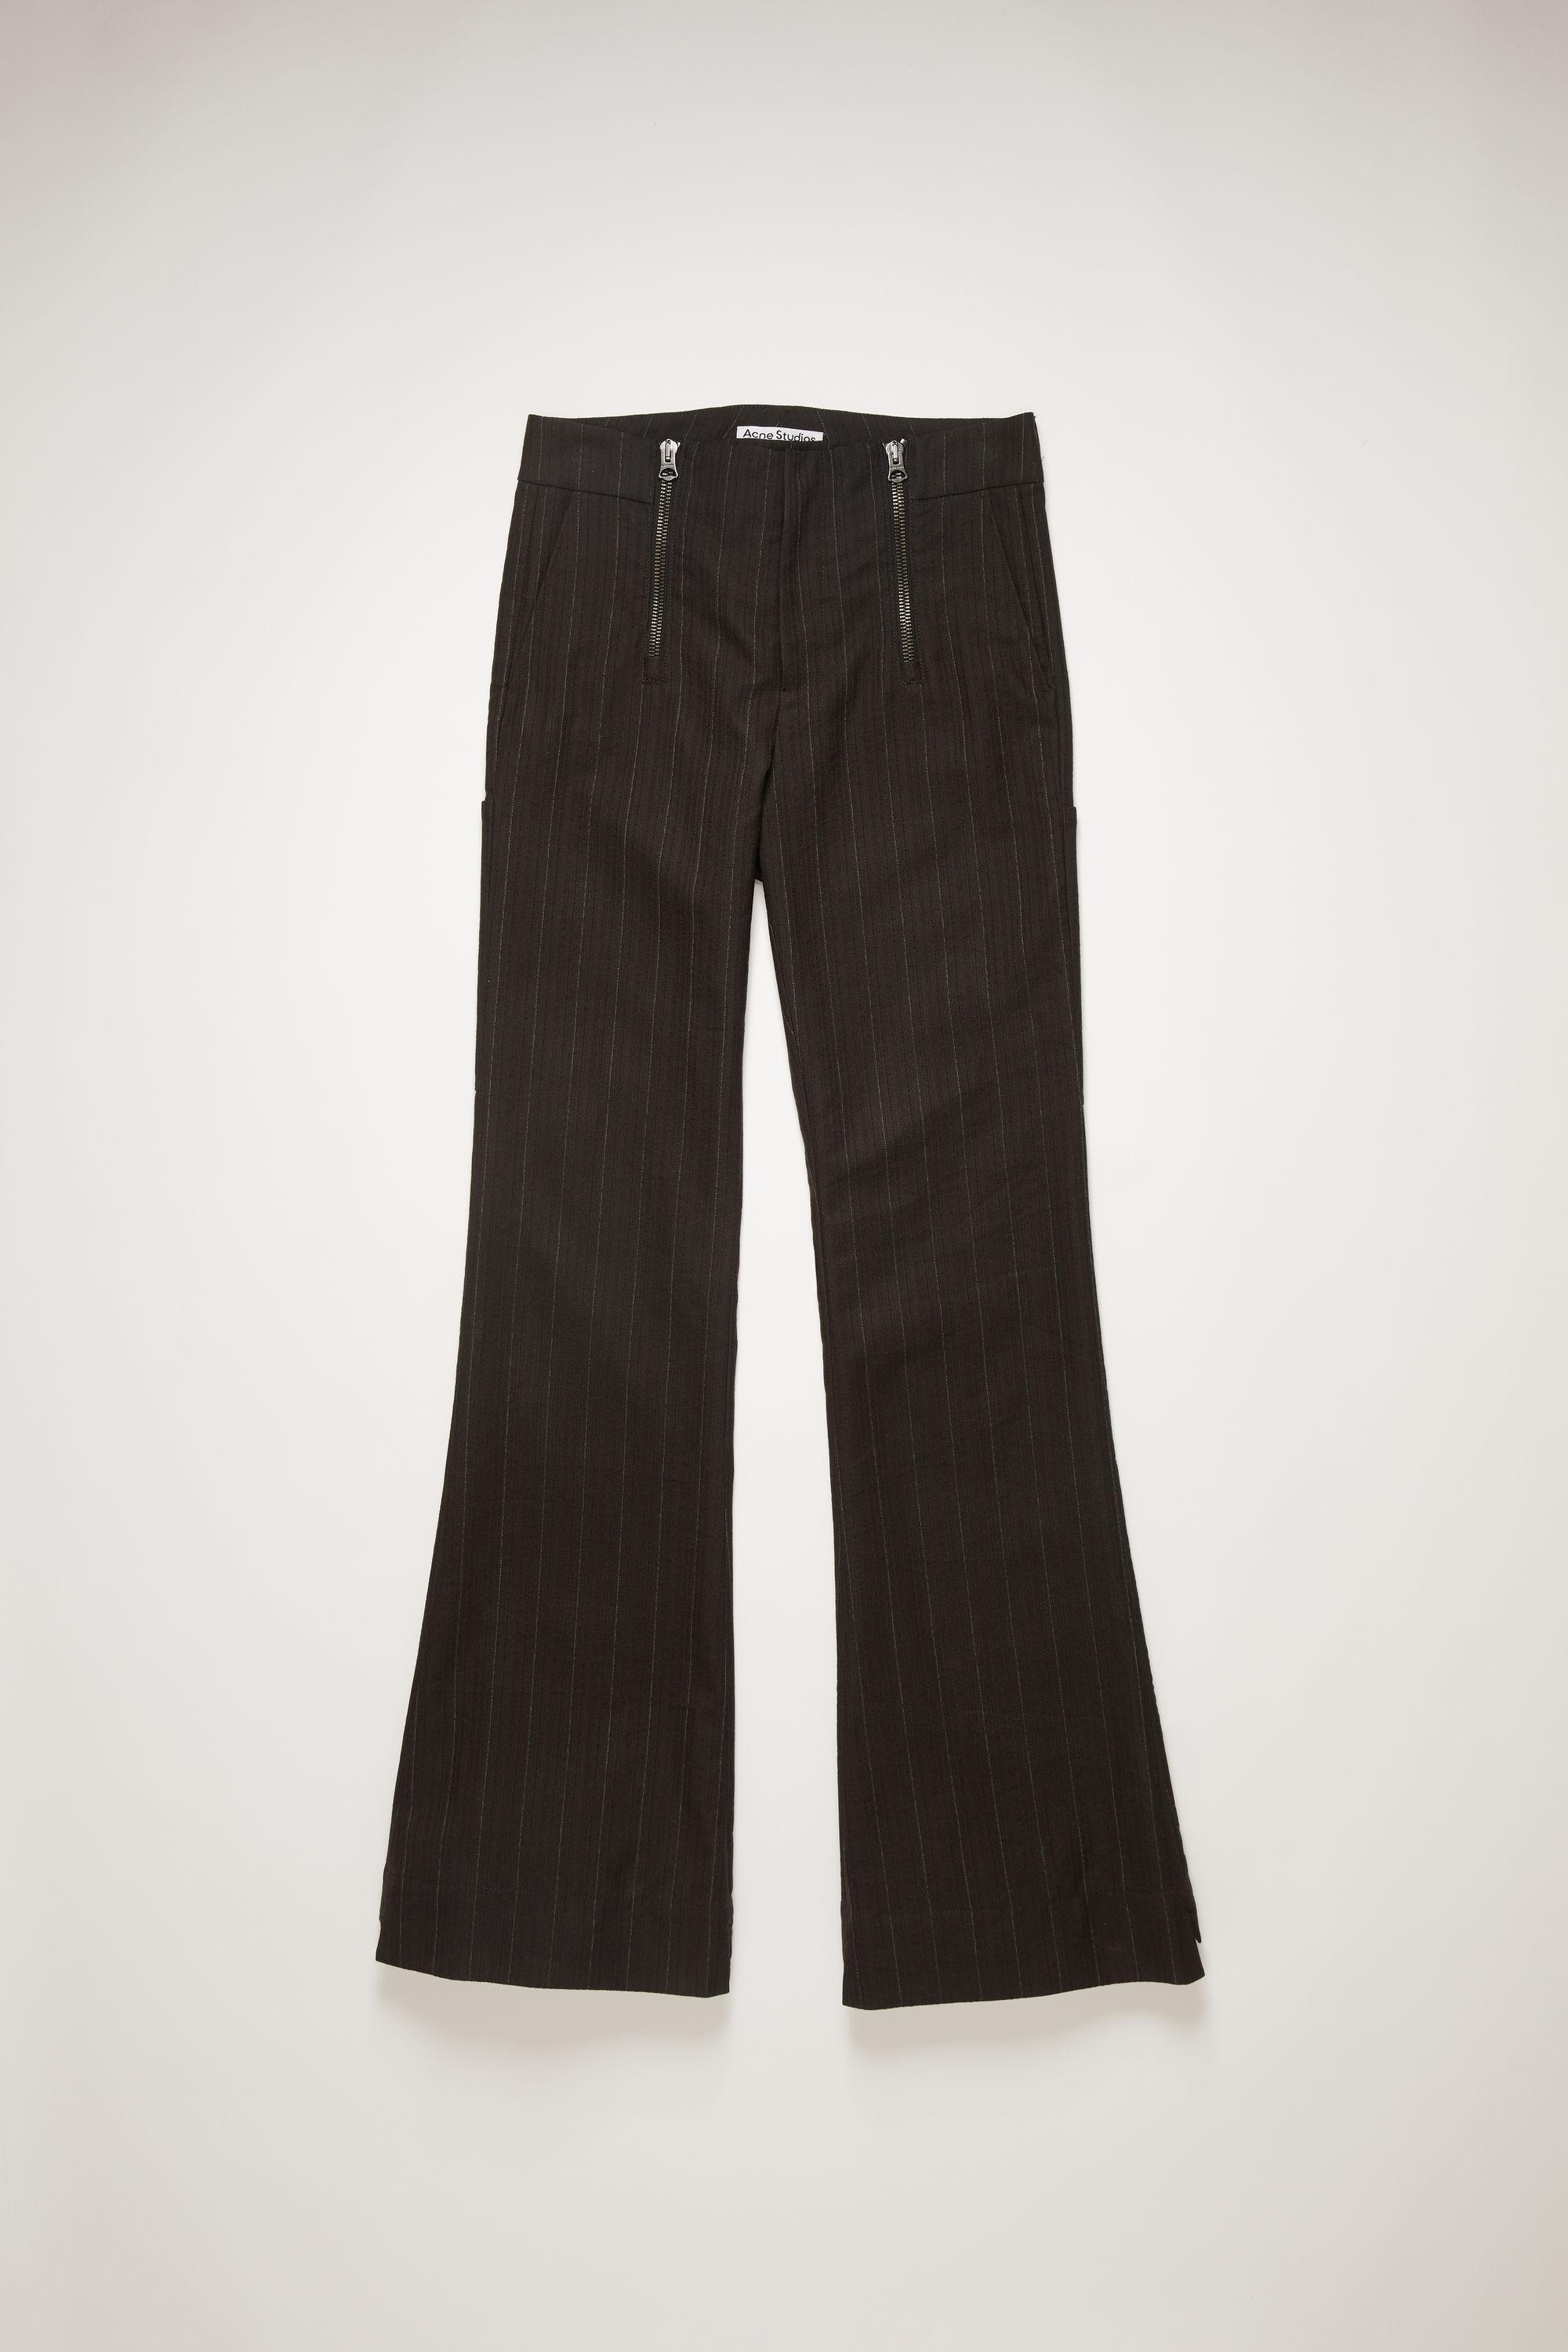 Acne Studios Synthetic Fn-mn-trou000400 Cacao Brown Pinstripe Flared  Trousers for Men - Lyst